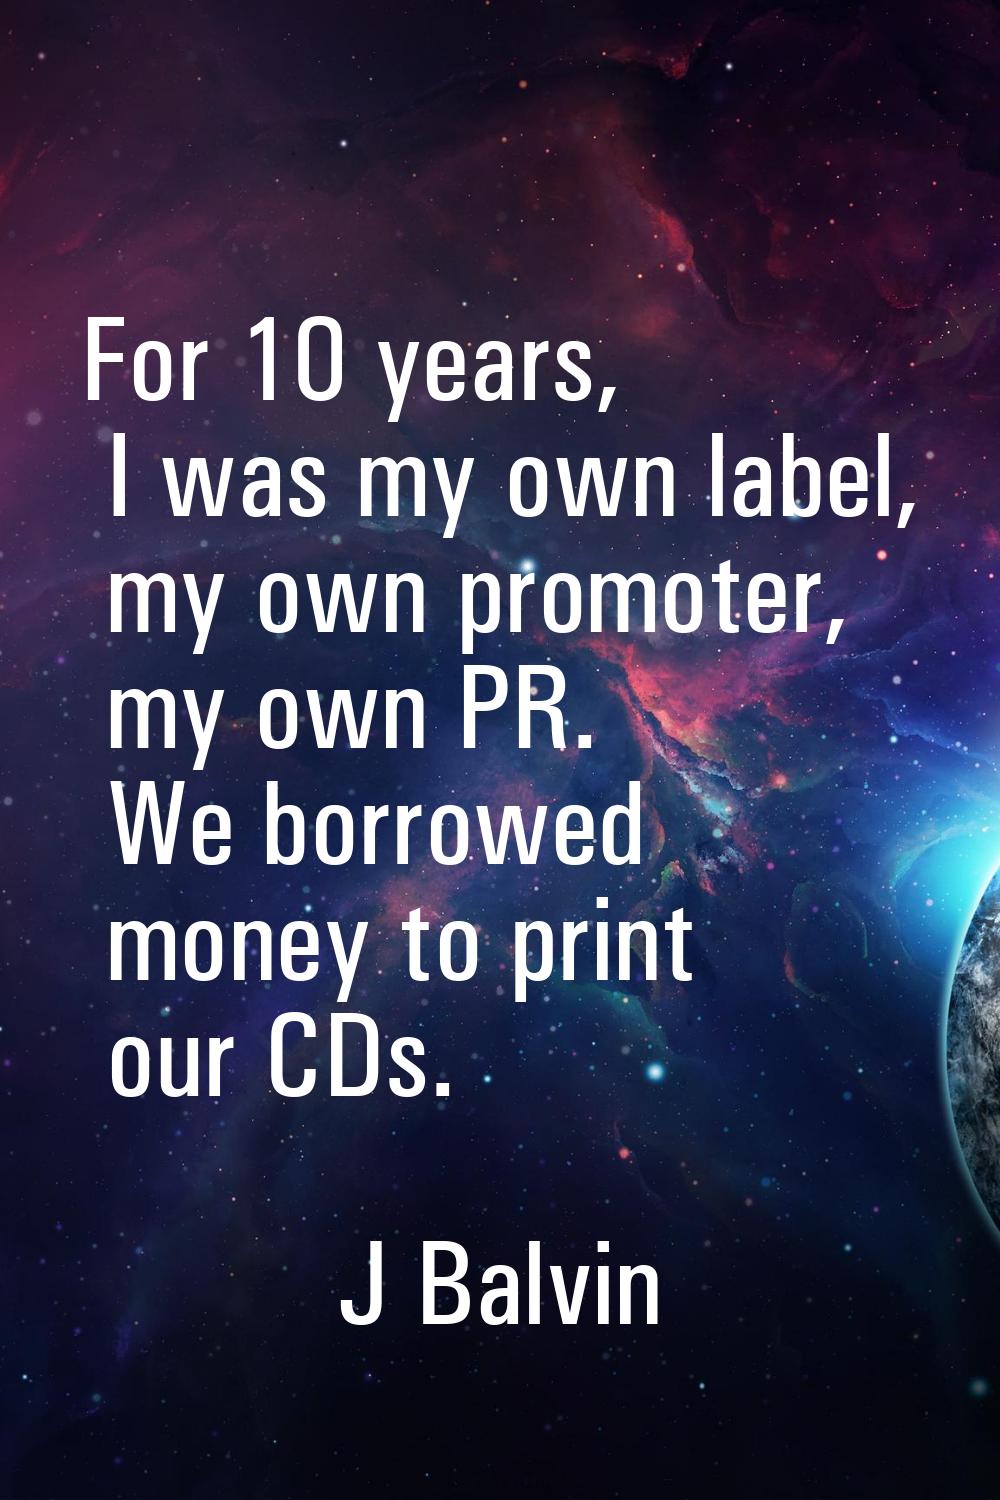 For 10 years, I was my own label, my own promoter, my own PR. We borrowed money to print our CDs.